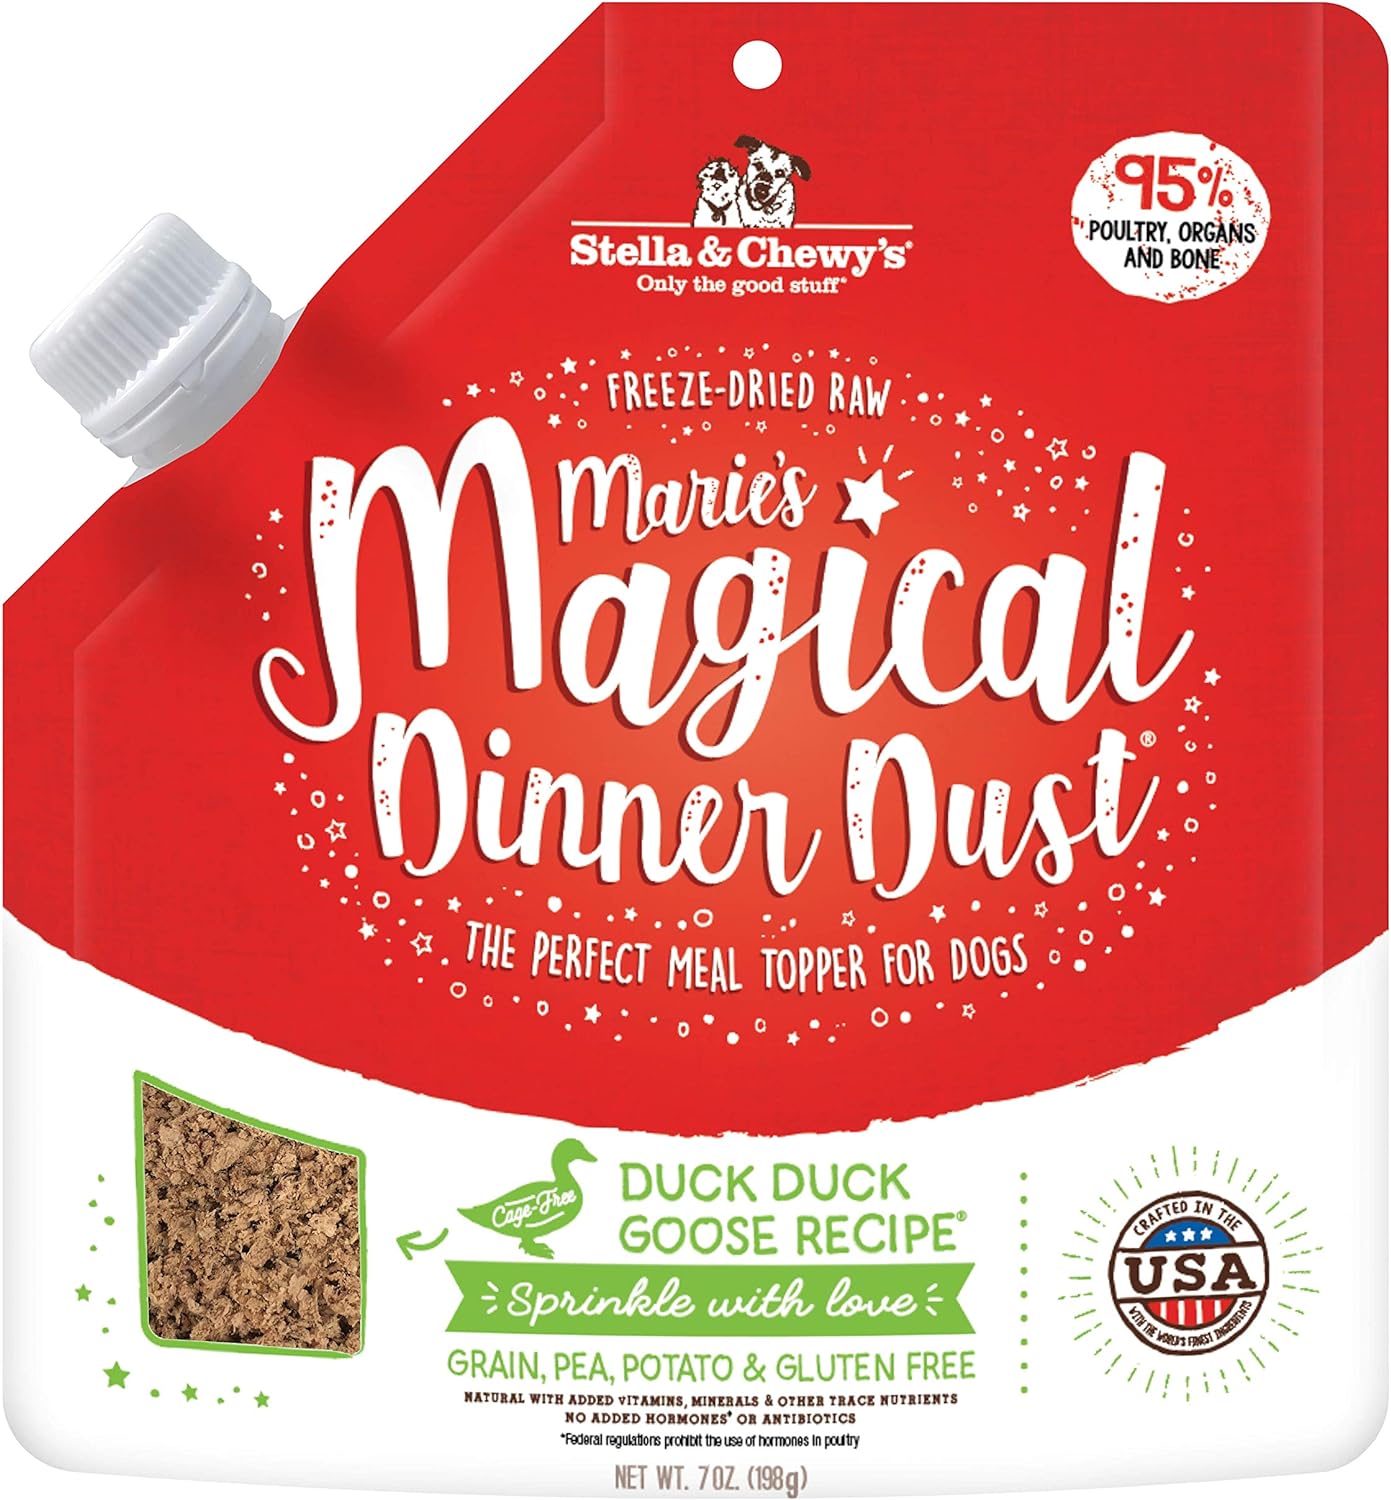 Stella & Chewy's Freeze-Dried Raw Marie's Magical Dinner Dust – Protein Rich, Grain Free Dog & Puppy Food Topper – Duck Duck Goose Recipe – 7 Oz Bag